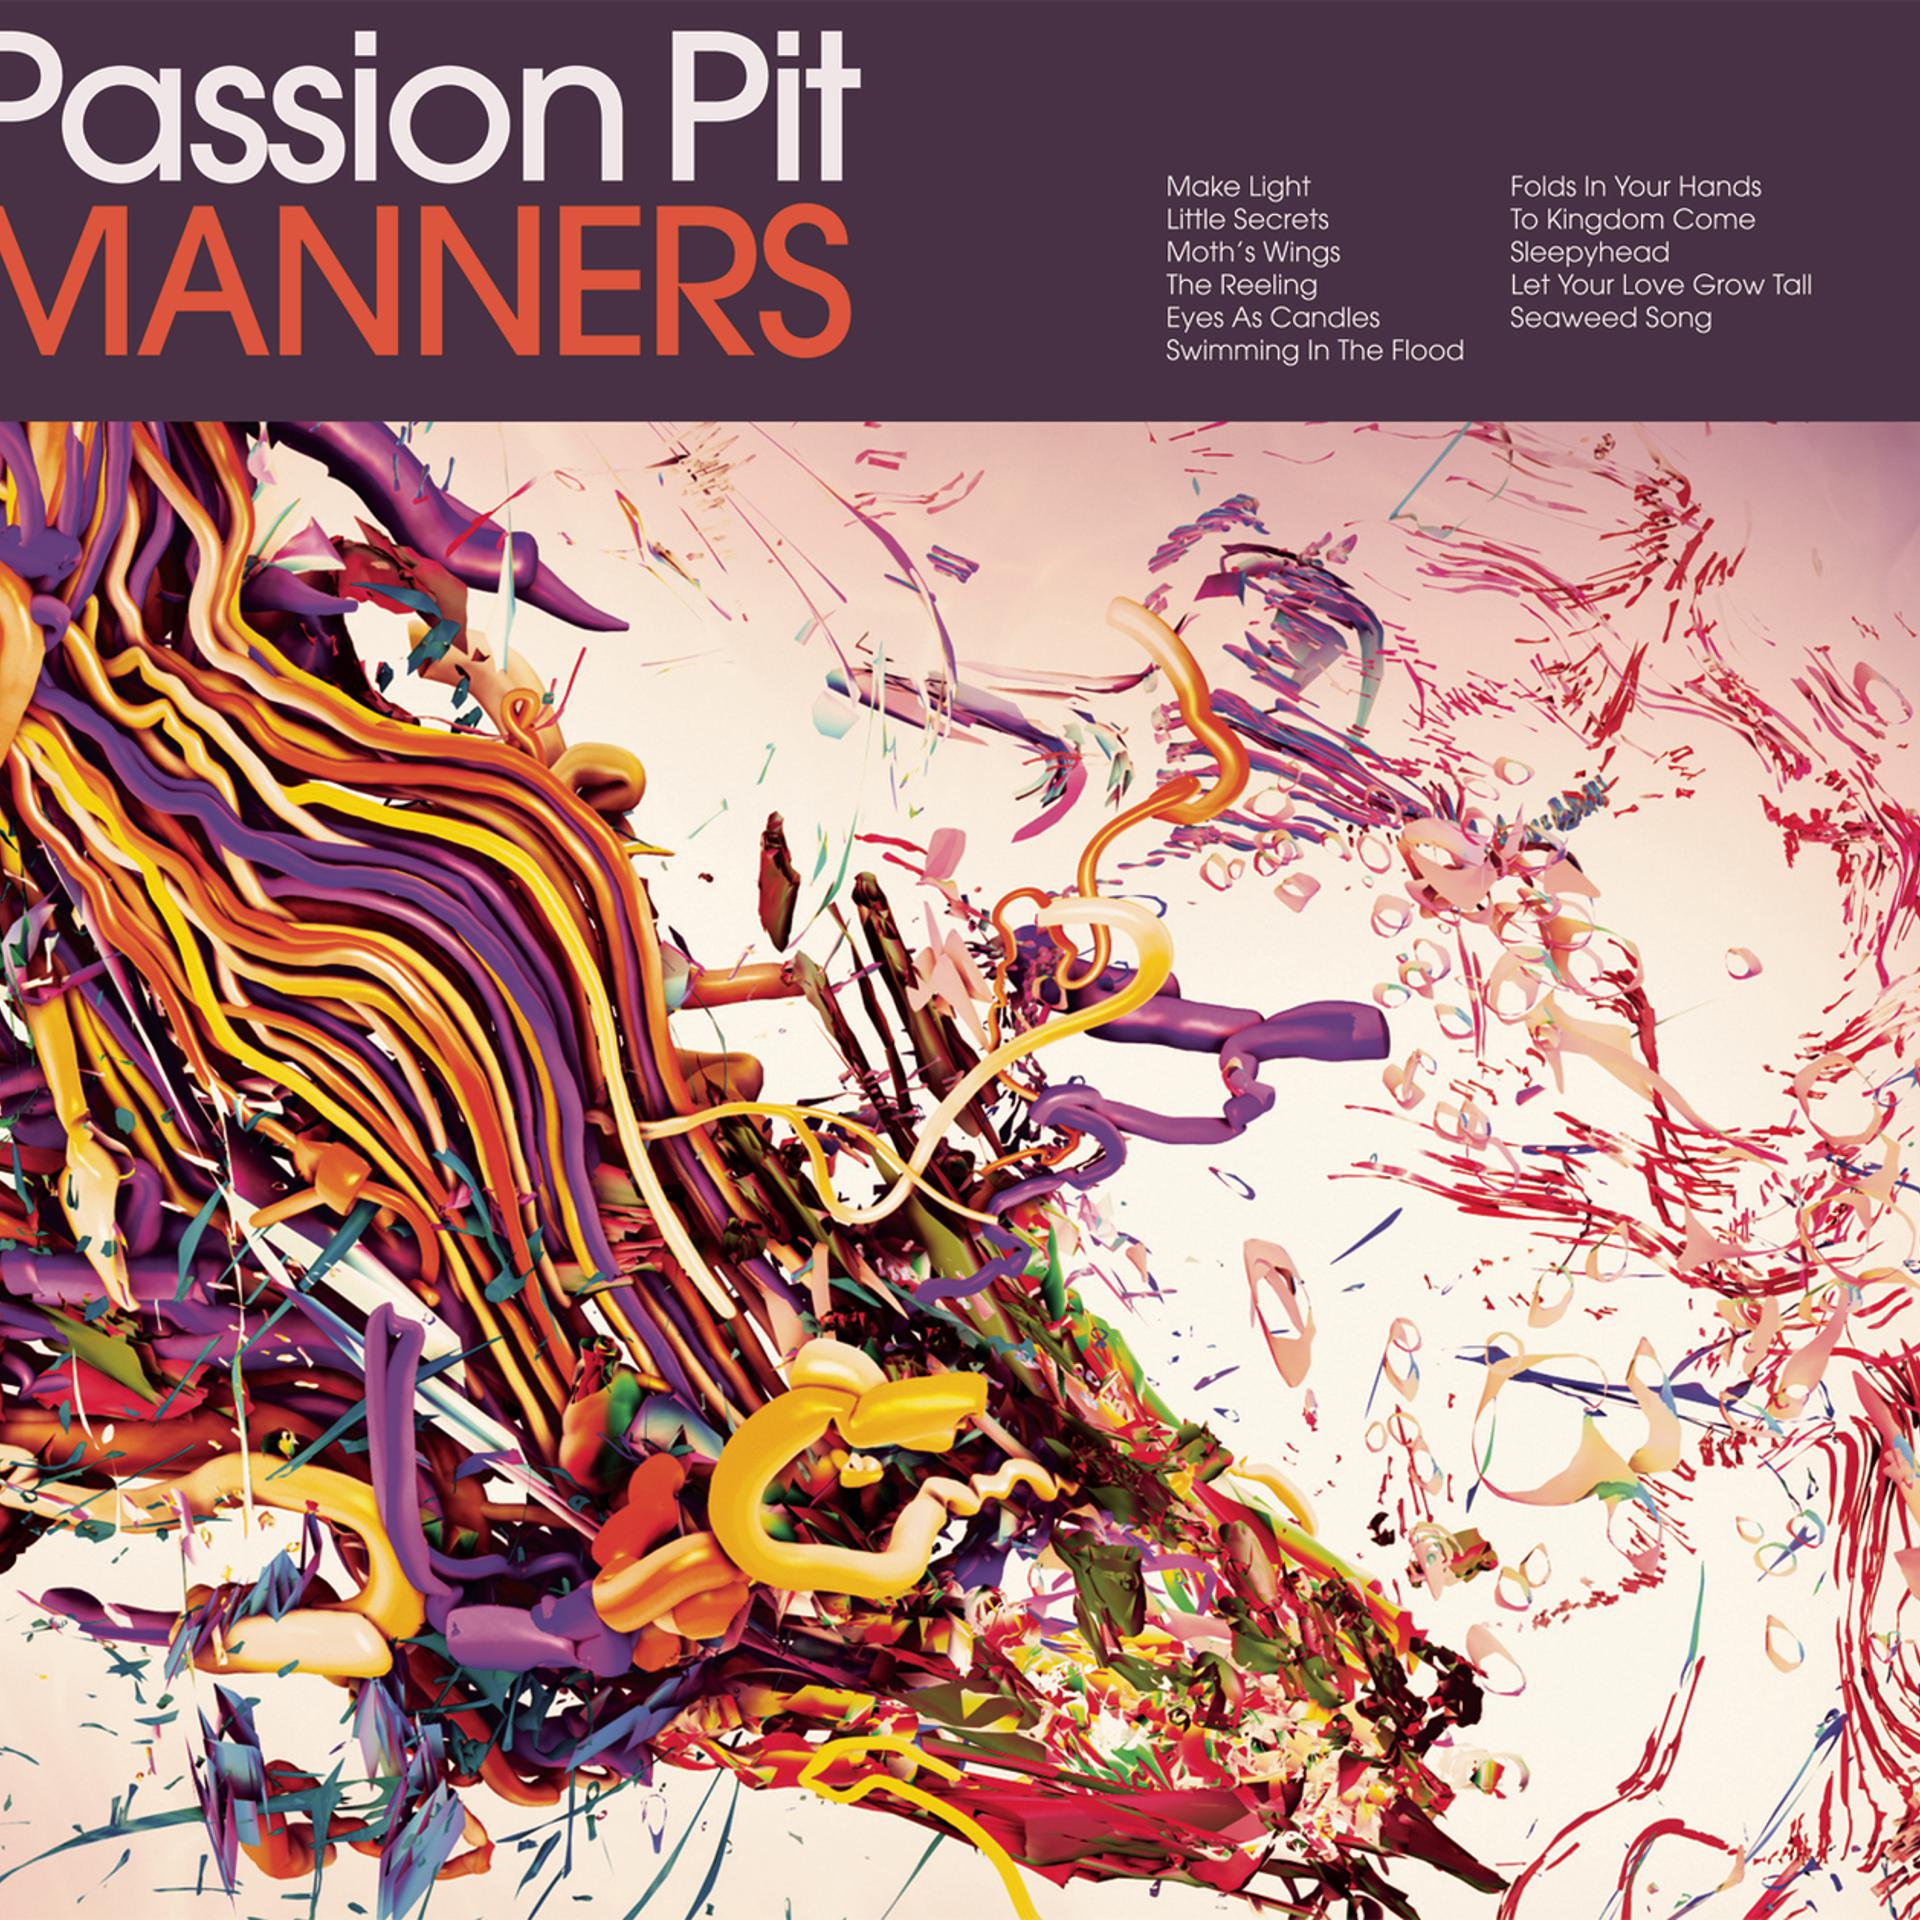 Passion Pit manners. Sleepyhead passion Pit. CD passion Pit: manners. Passion Sleepyhead. Passion pit